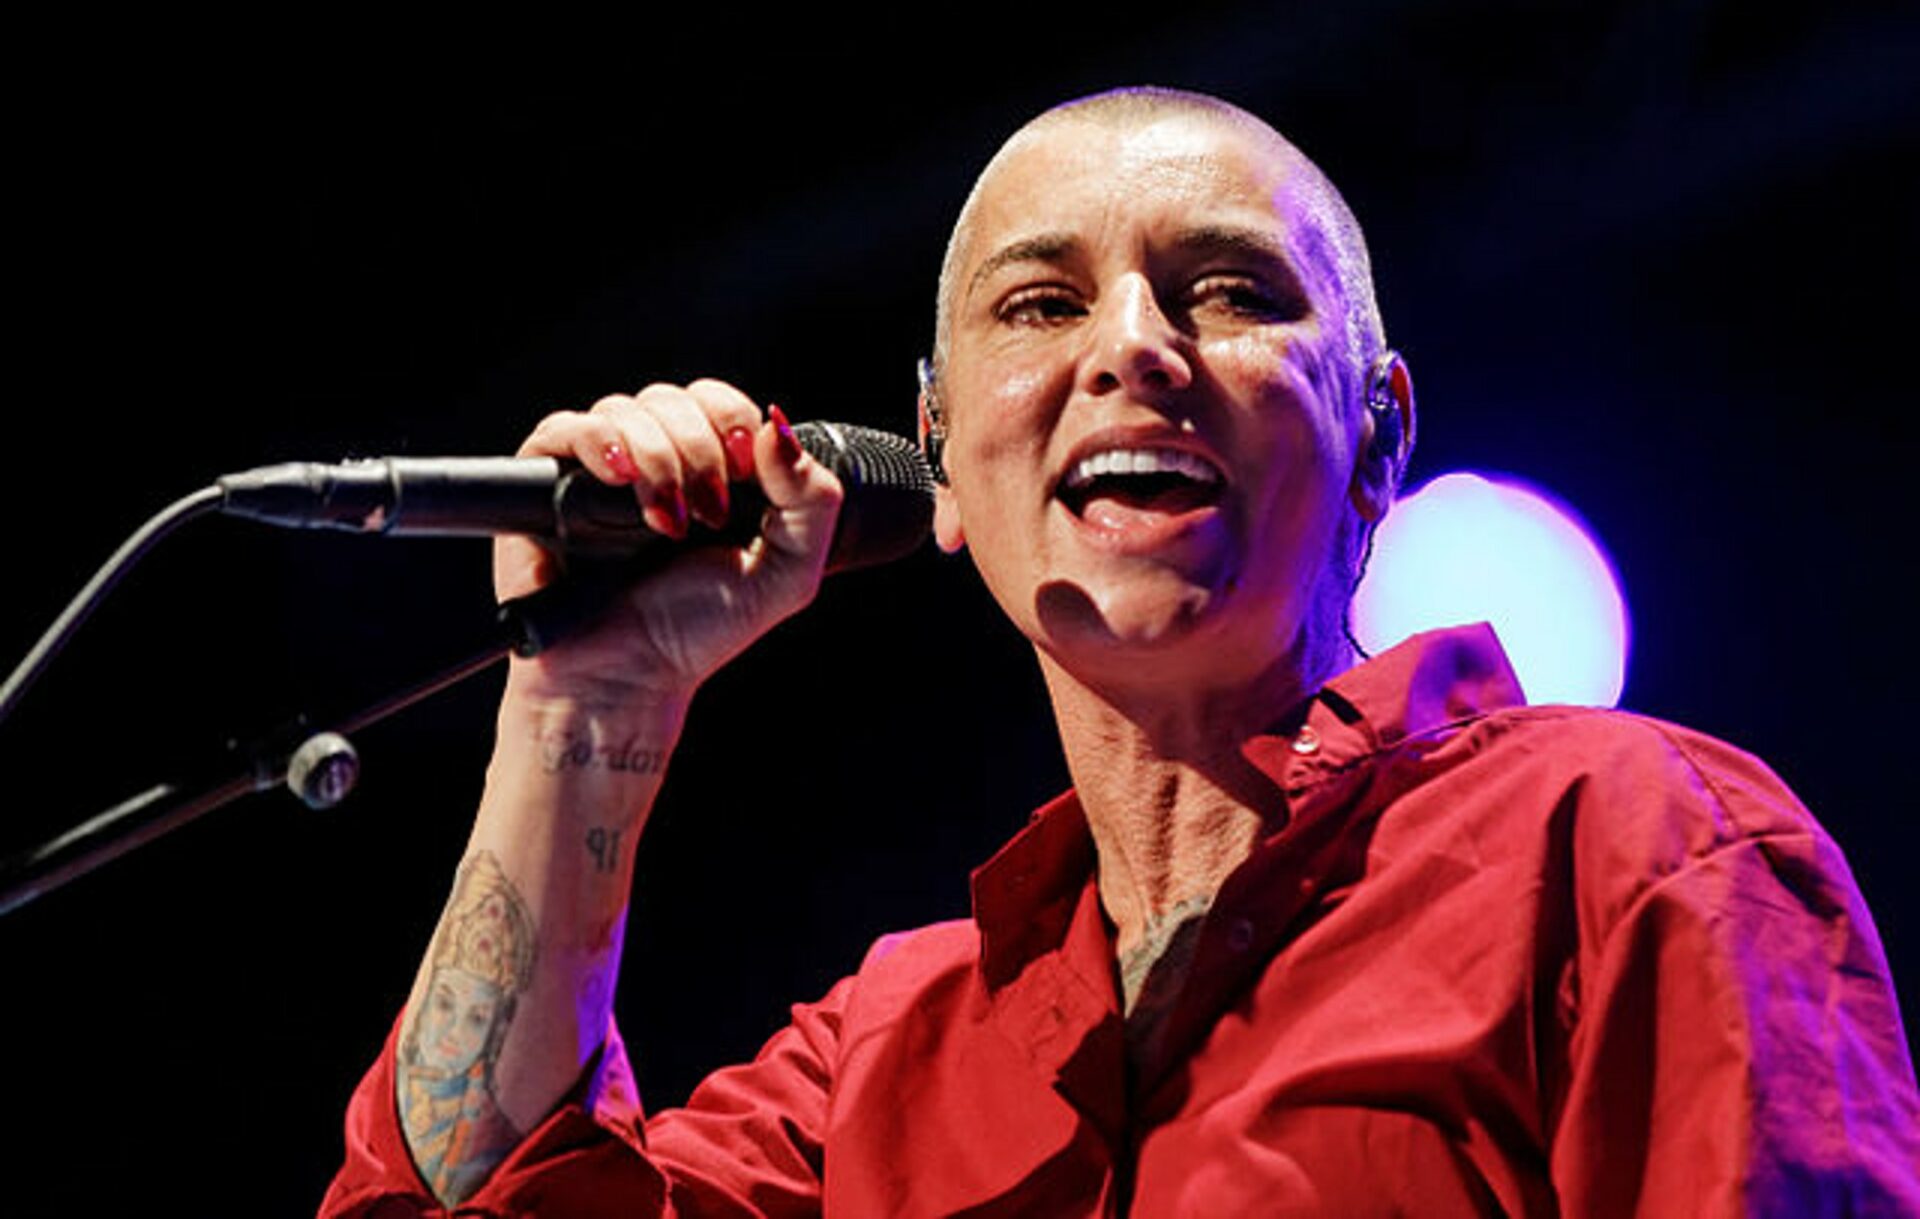 New Sinead O’Connor song soundtracks ‘The Woman in the Wall’